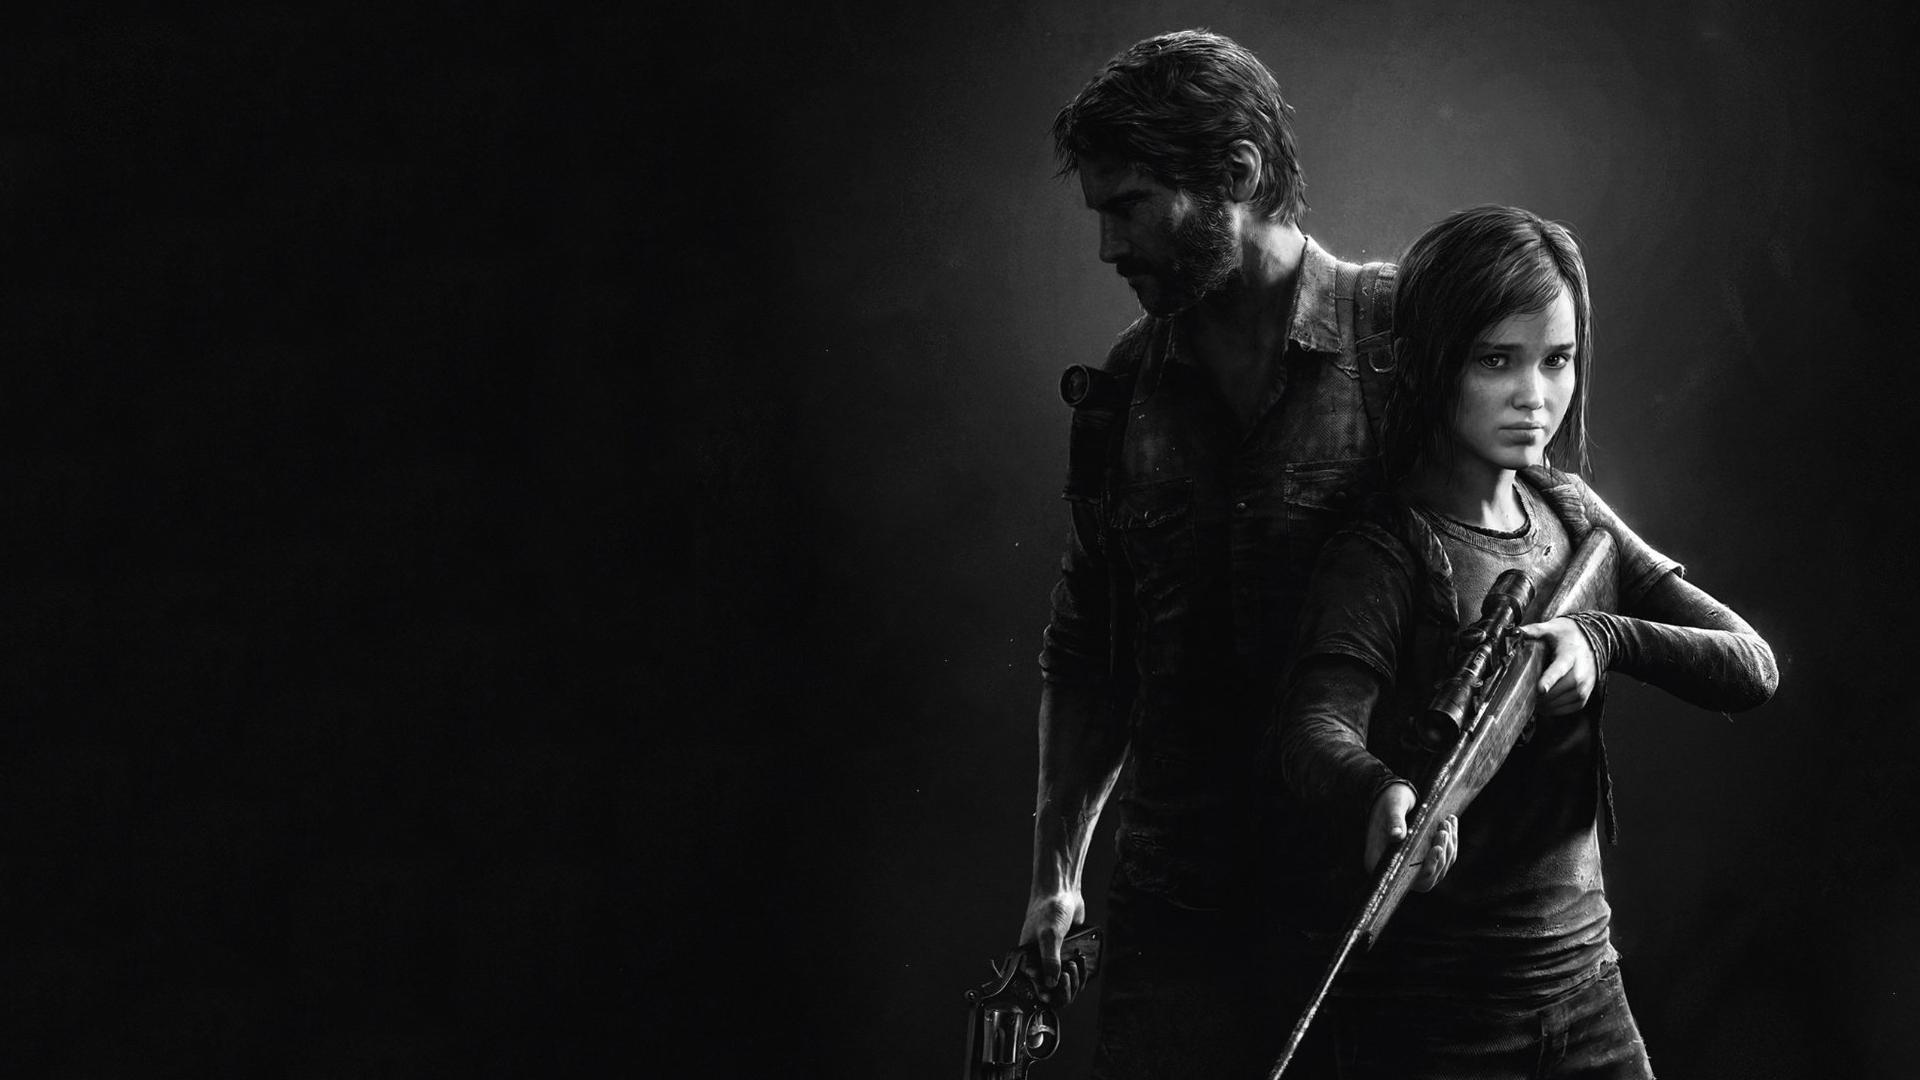 I created a Last of Us Remastered Wallpaper. Enjoy!